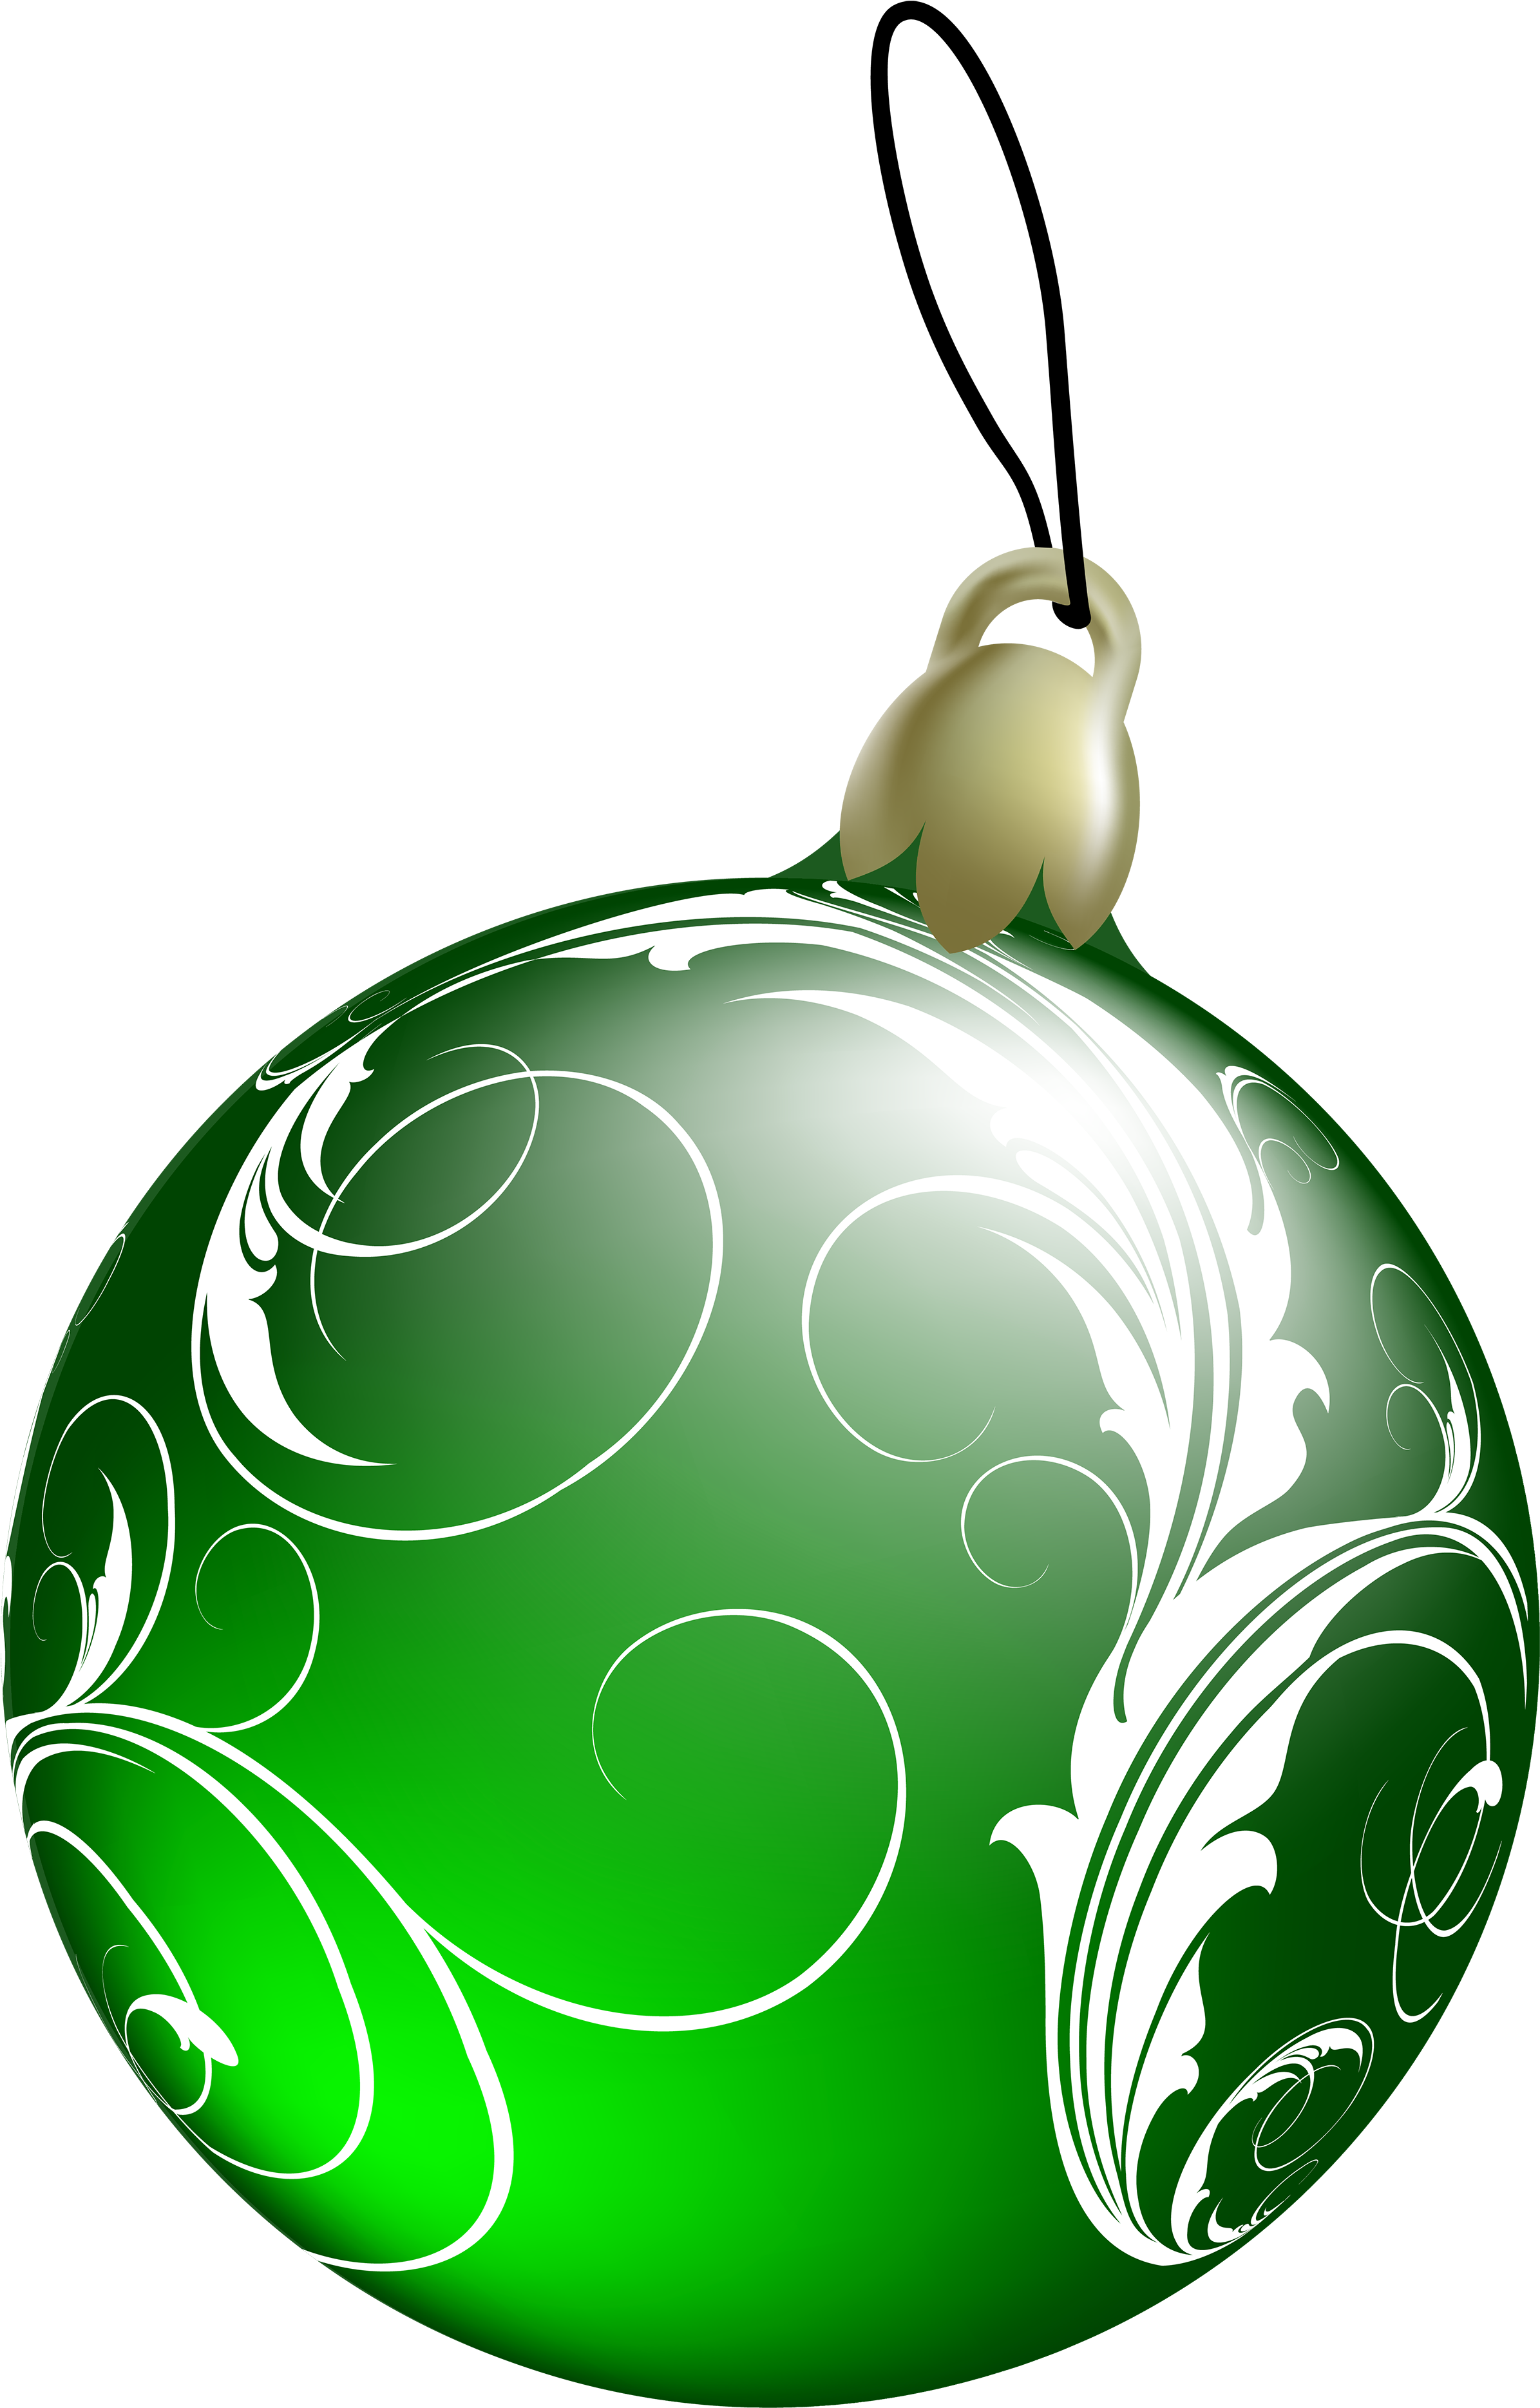 Green Christmas Ornaments Free Download Image PNG Image